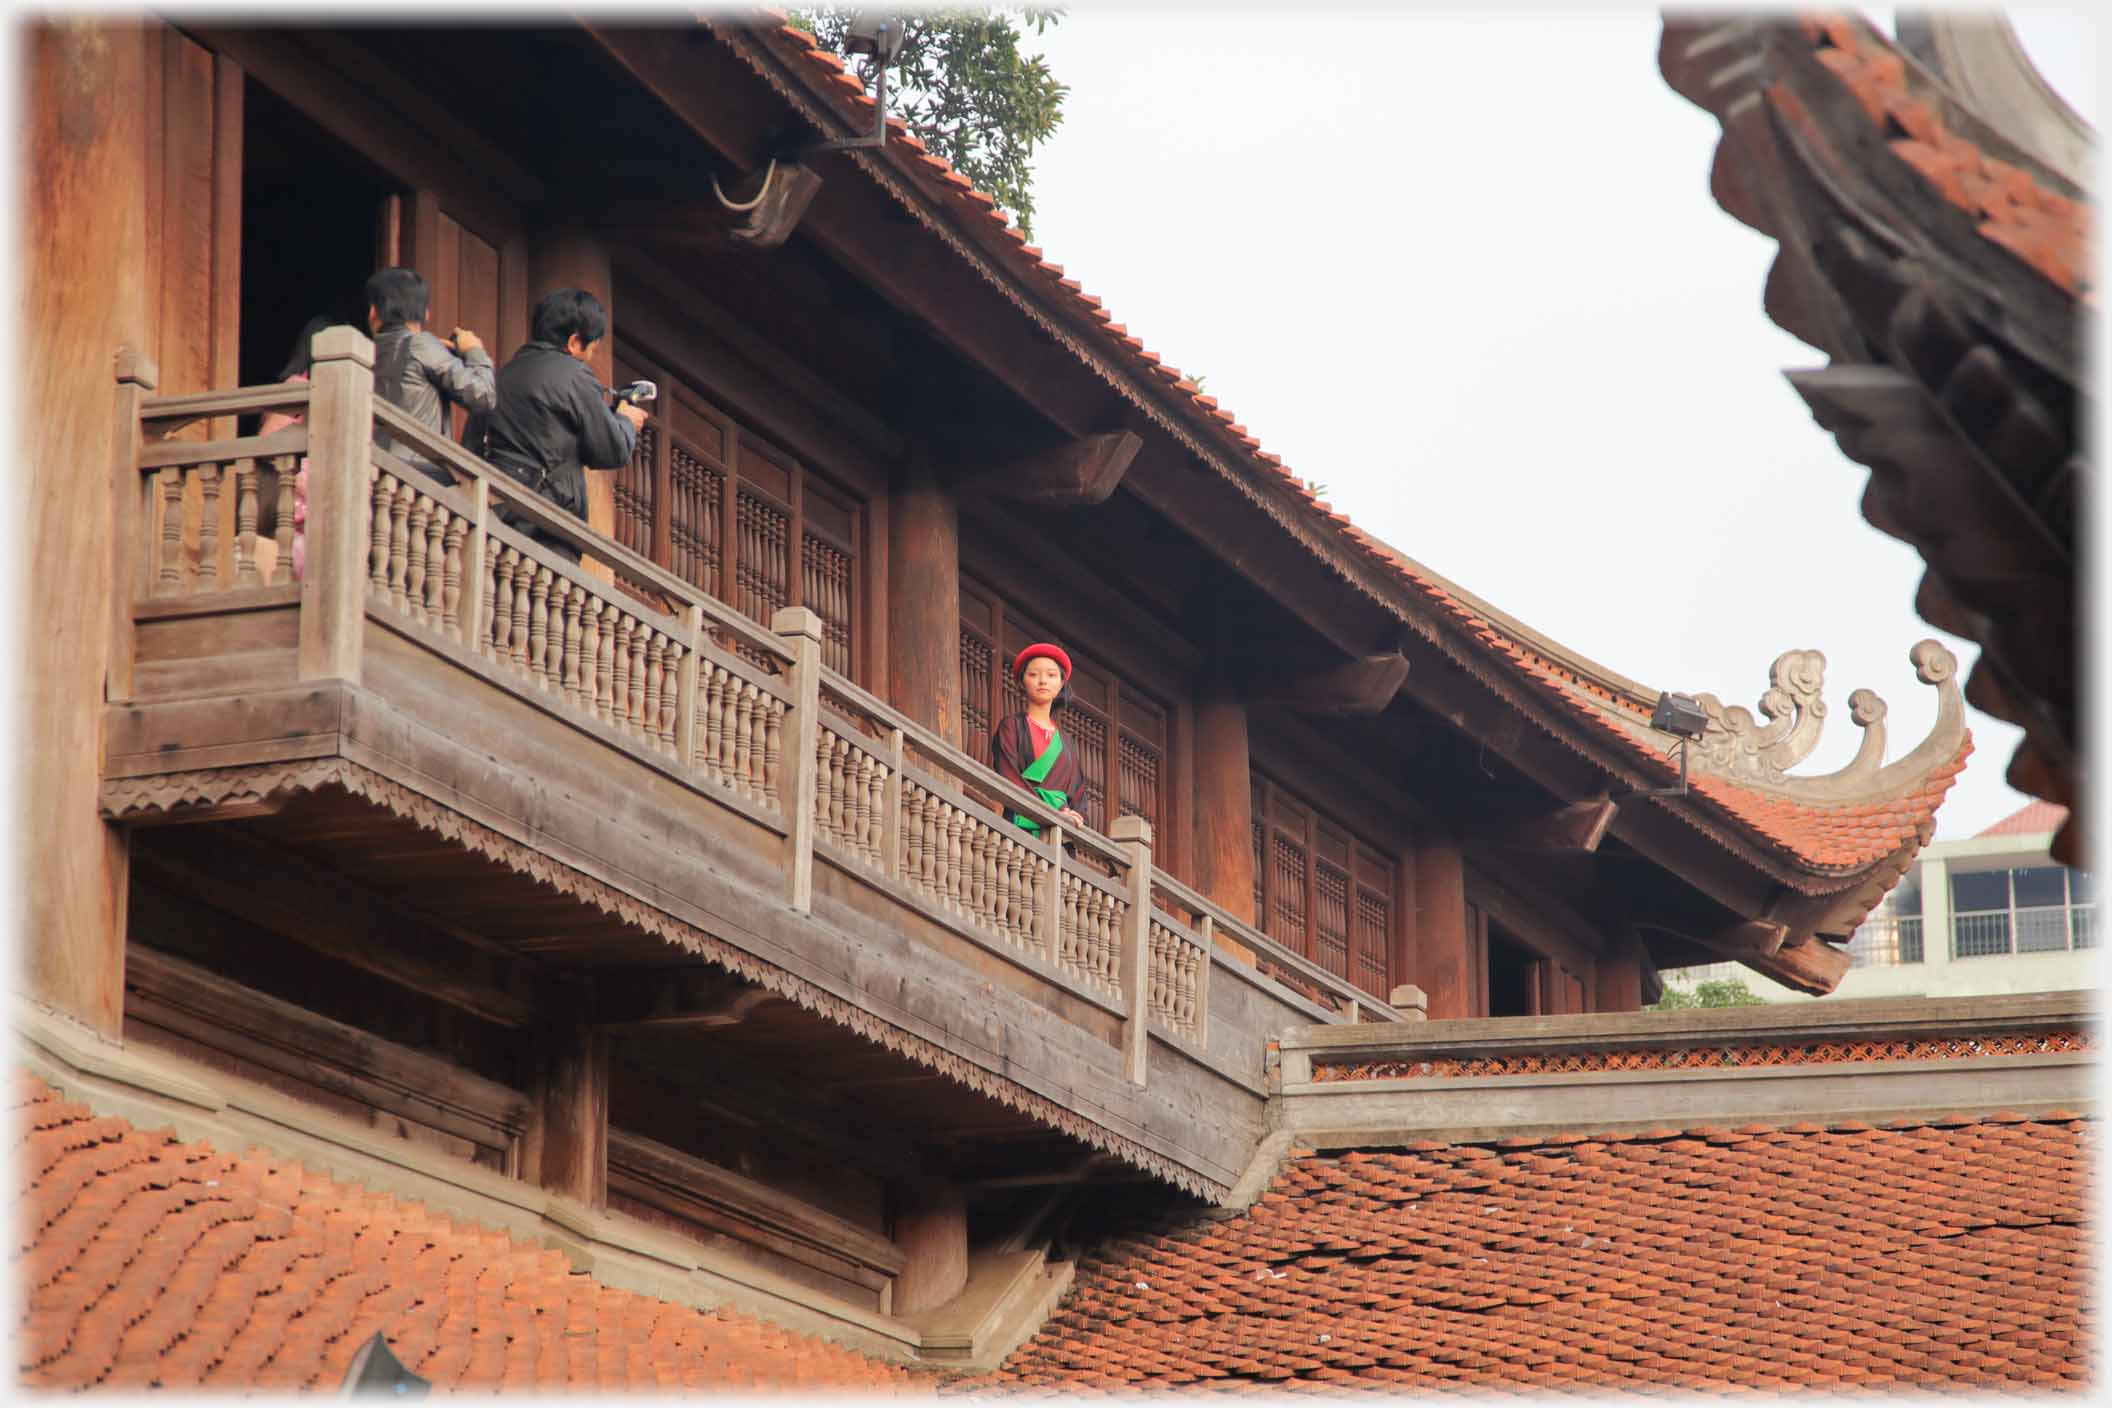 Balcony on two story building with photographer and woman.